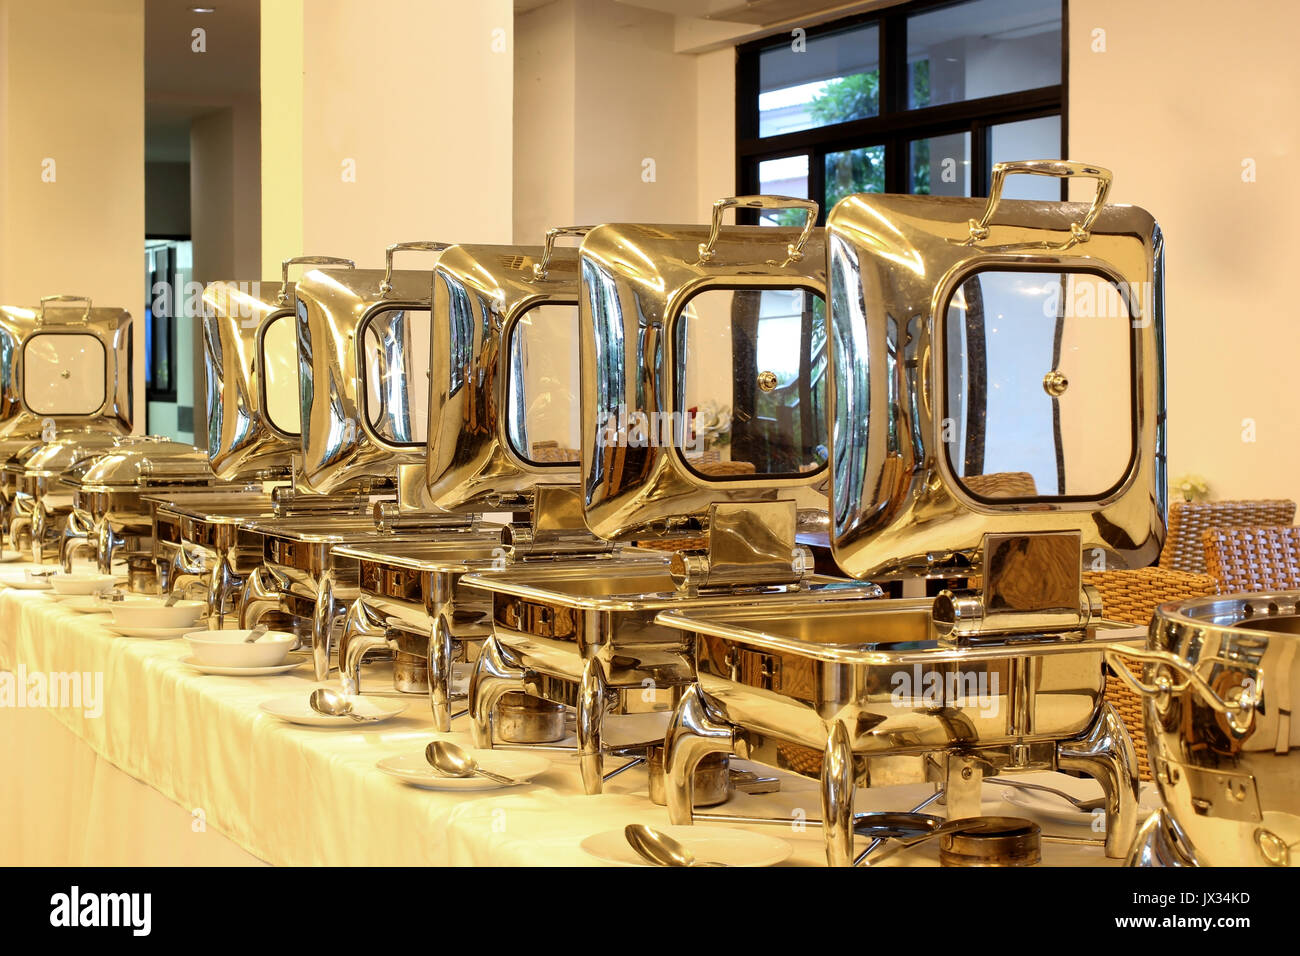 row of food service steam pans on buffet table Stock Photo